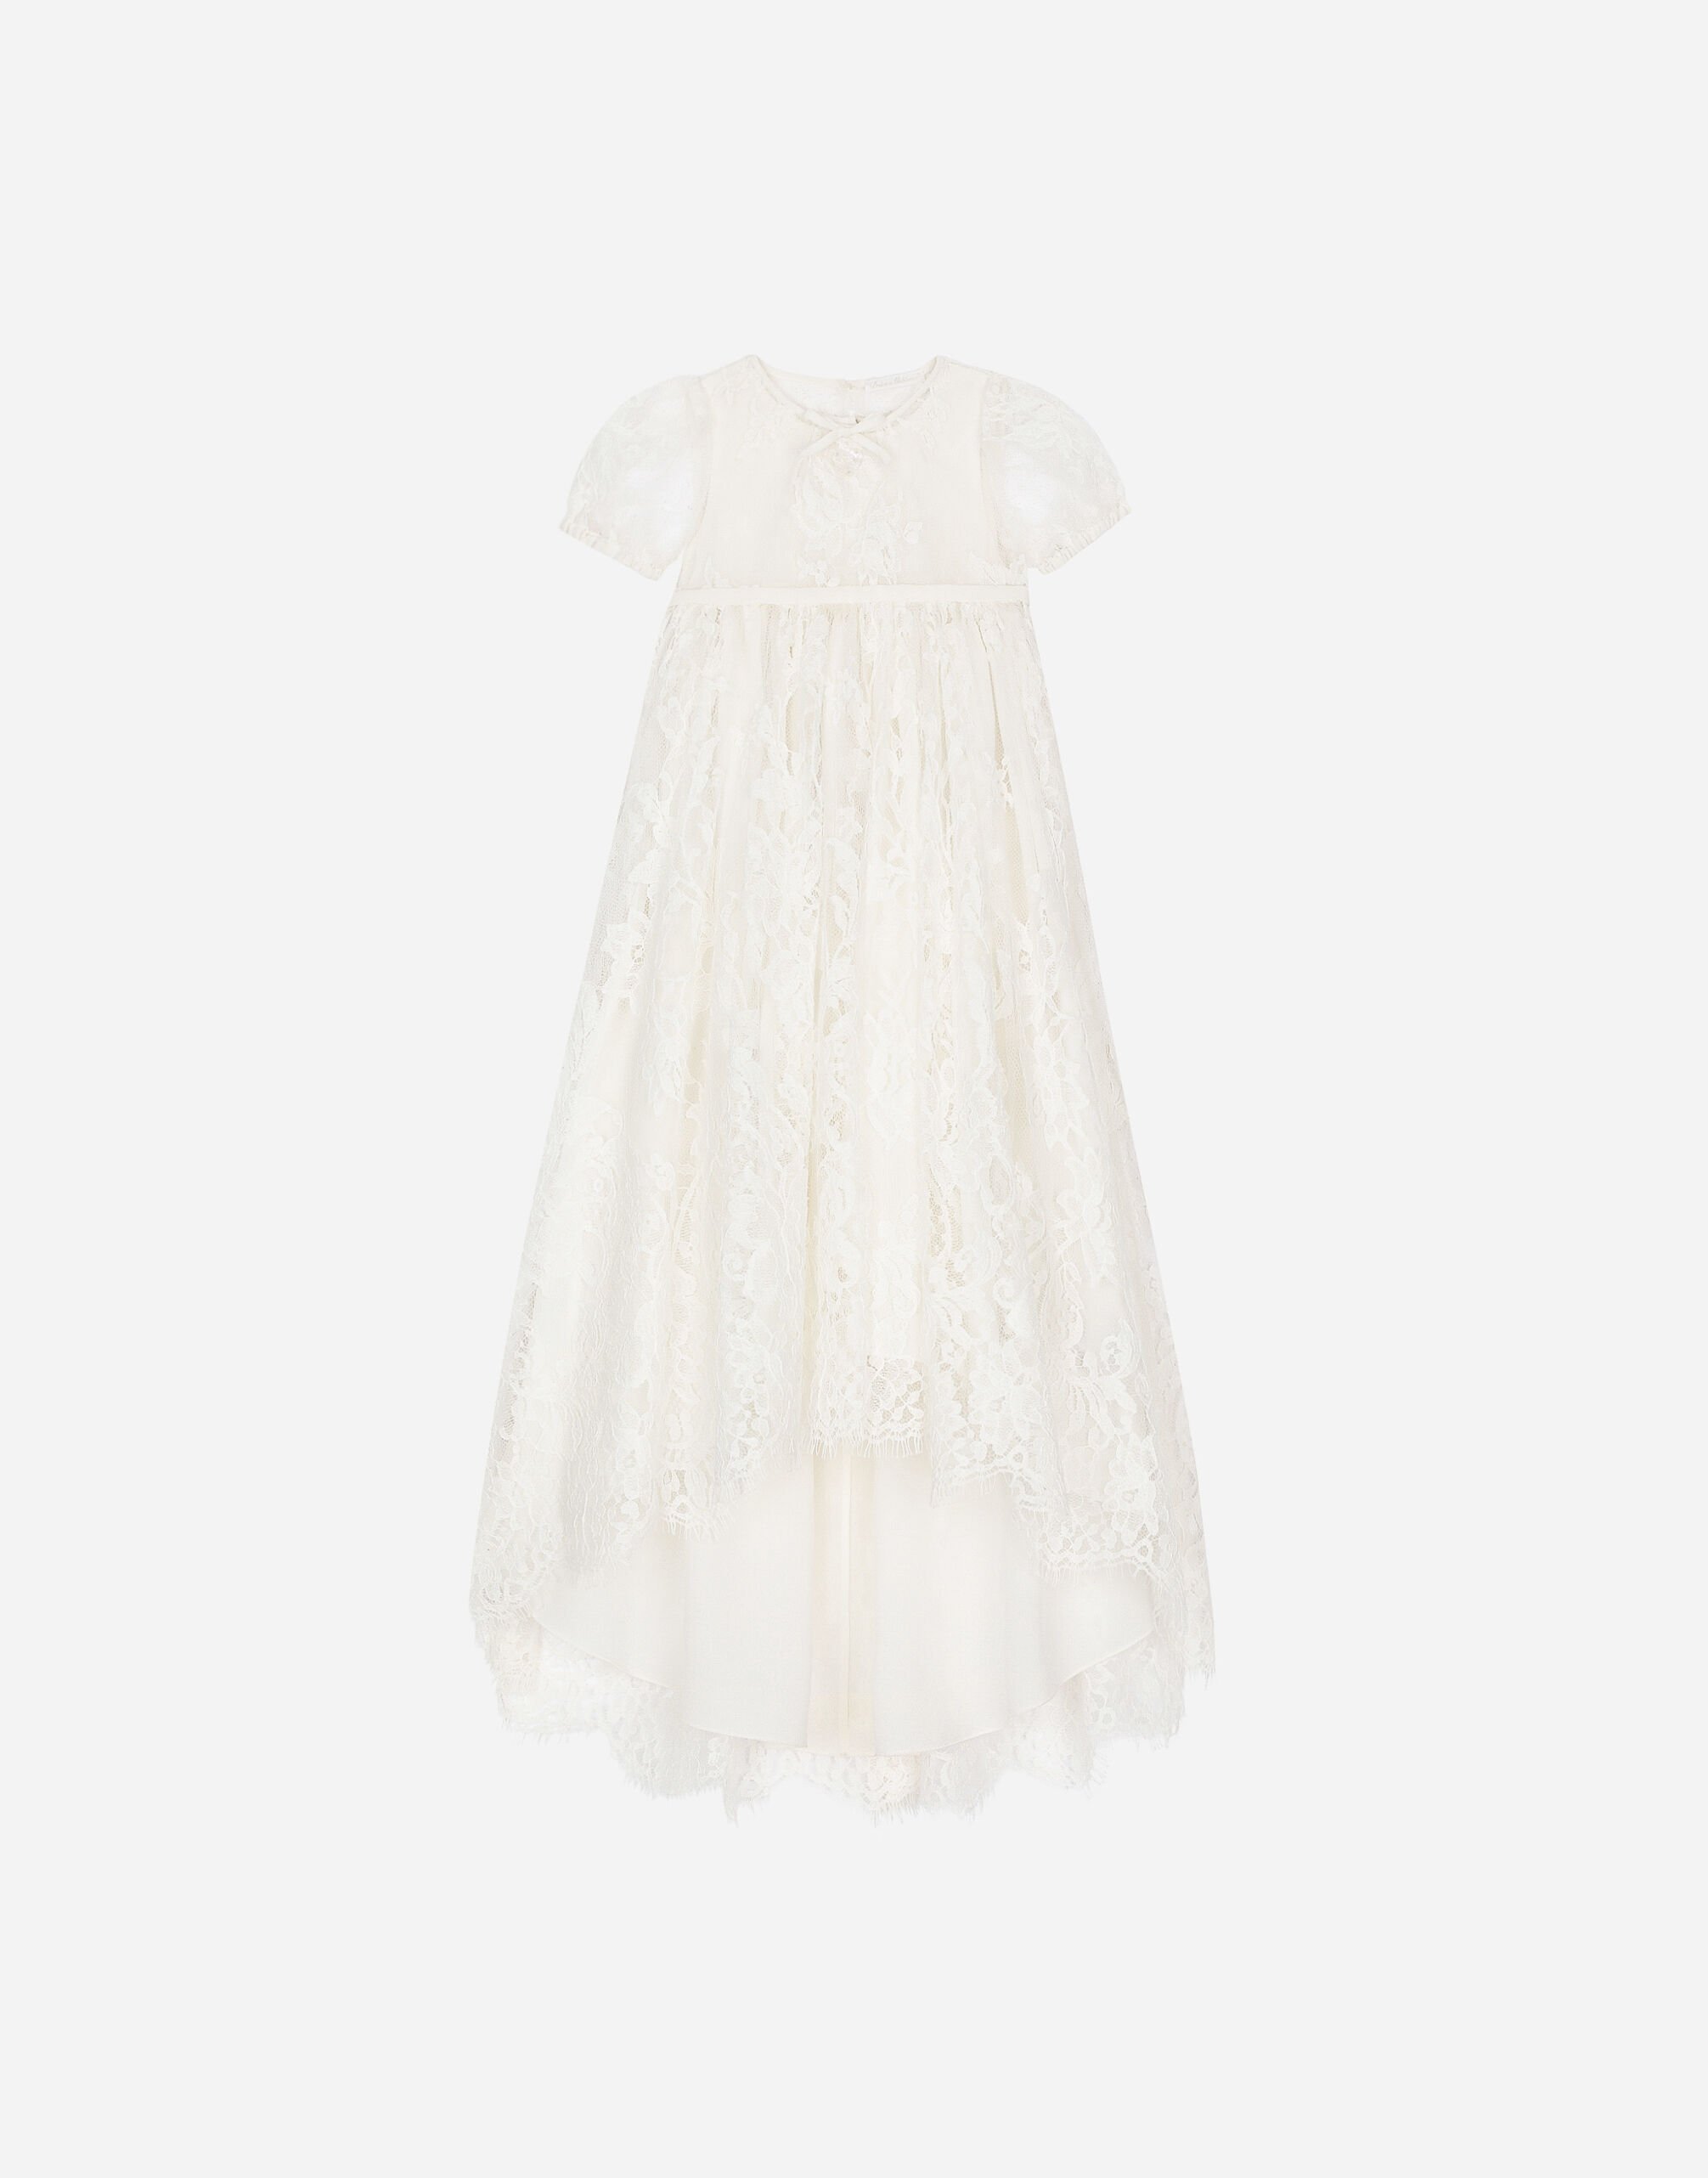 Dolce & Gabbana Empire-line ramage Chantilly lace christening dress with short sleeves Print L2JDZ1G7NUL